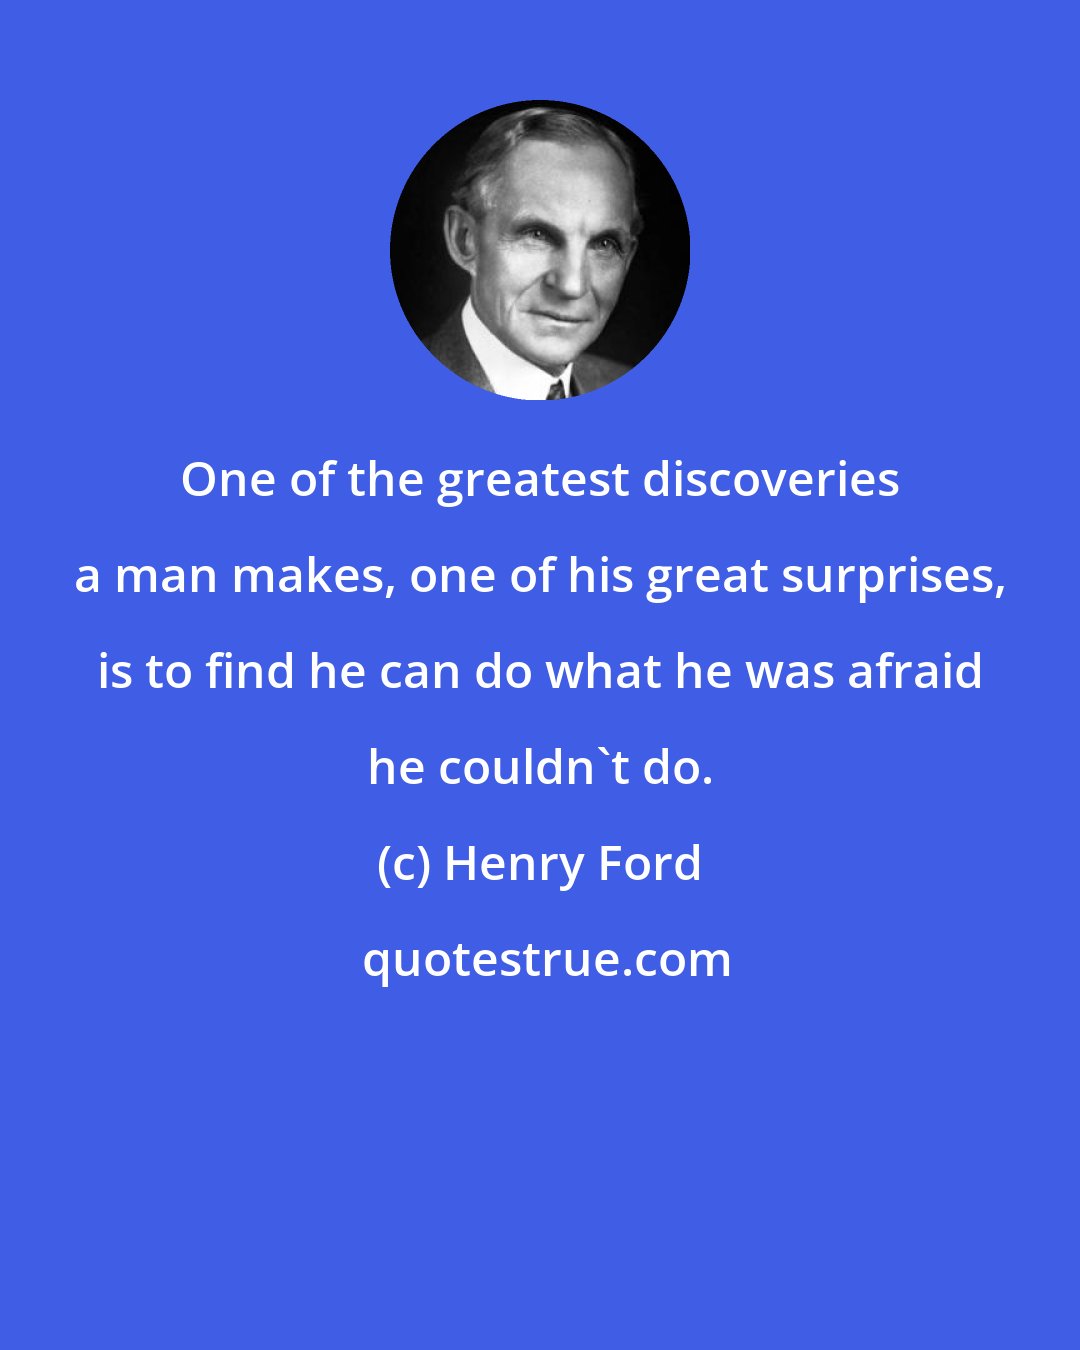 Henry Ford: One of the greatest discoveries a man makes, one of his great surprises, is to find he can do what he was afraid he couldn't do.